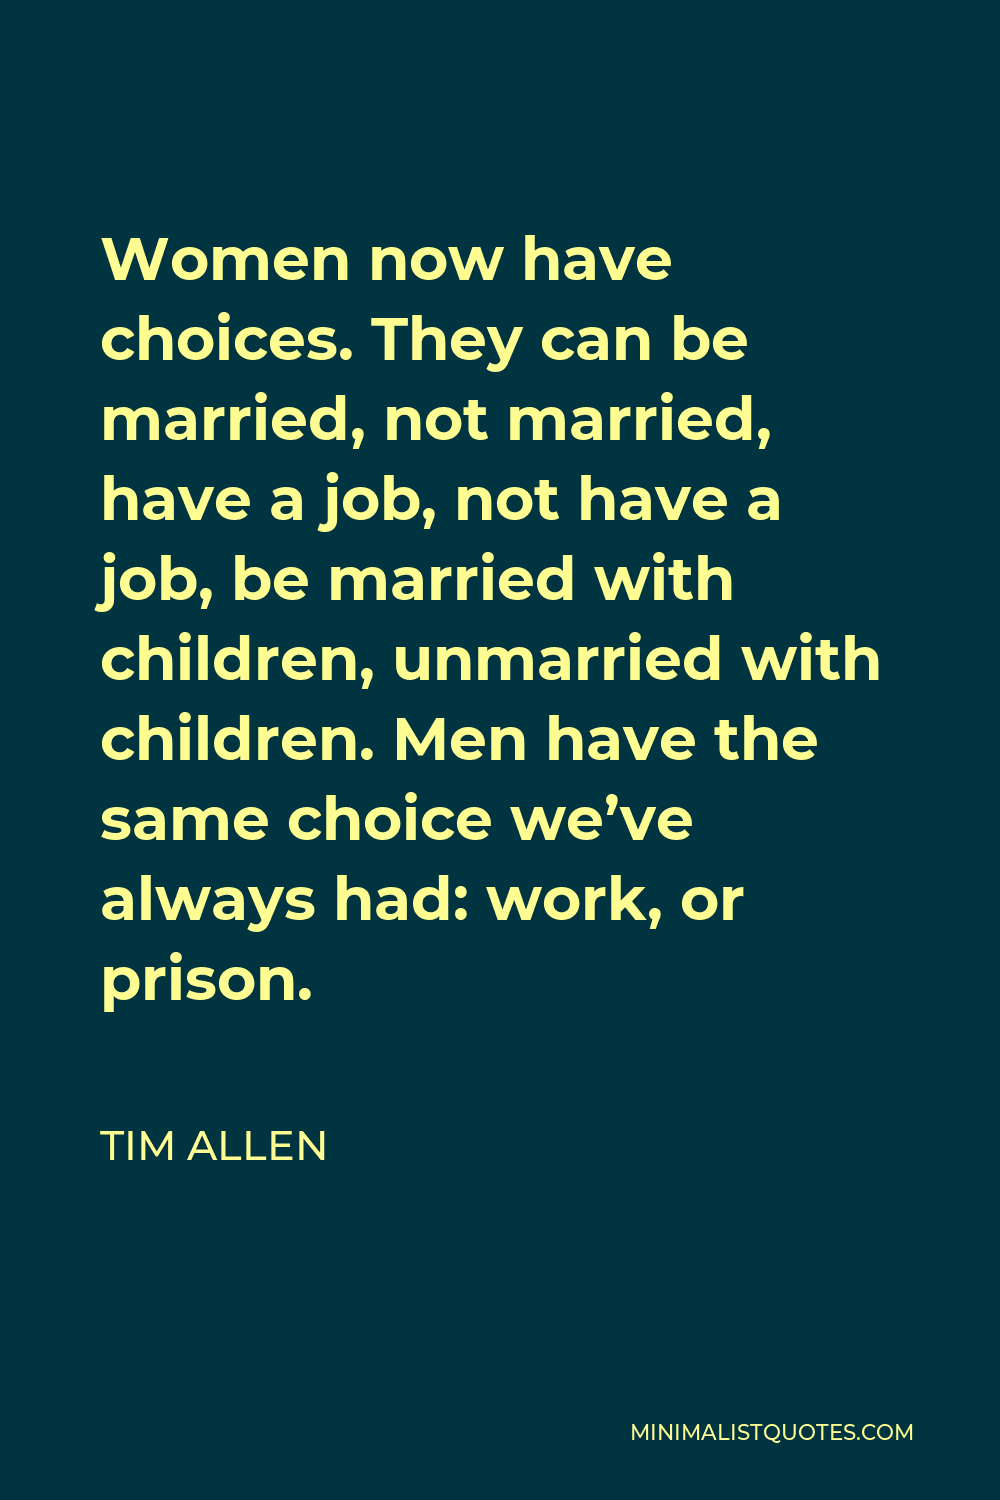 Tim Allen Quote - Women now have choices. They can be married, not married, have a job, not have a job, be married with children, unmarried with children. Men have the same choice we’ve always had: work, or prison.